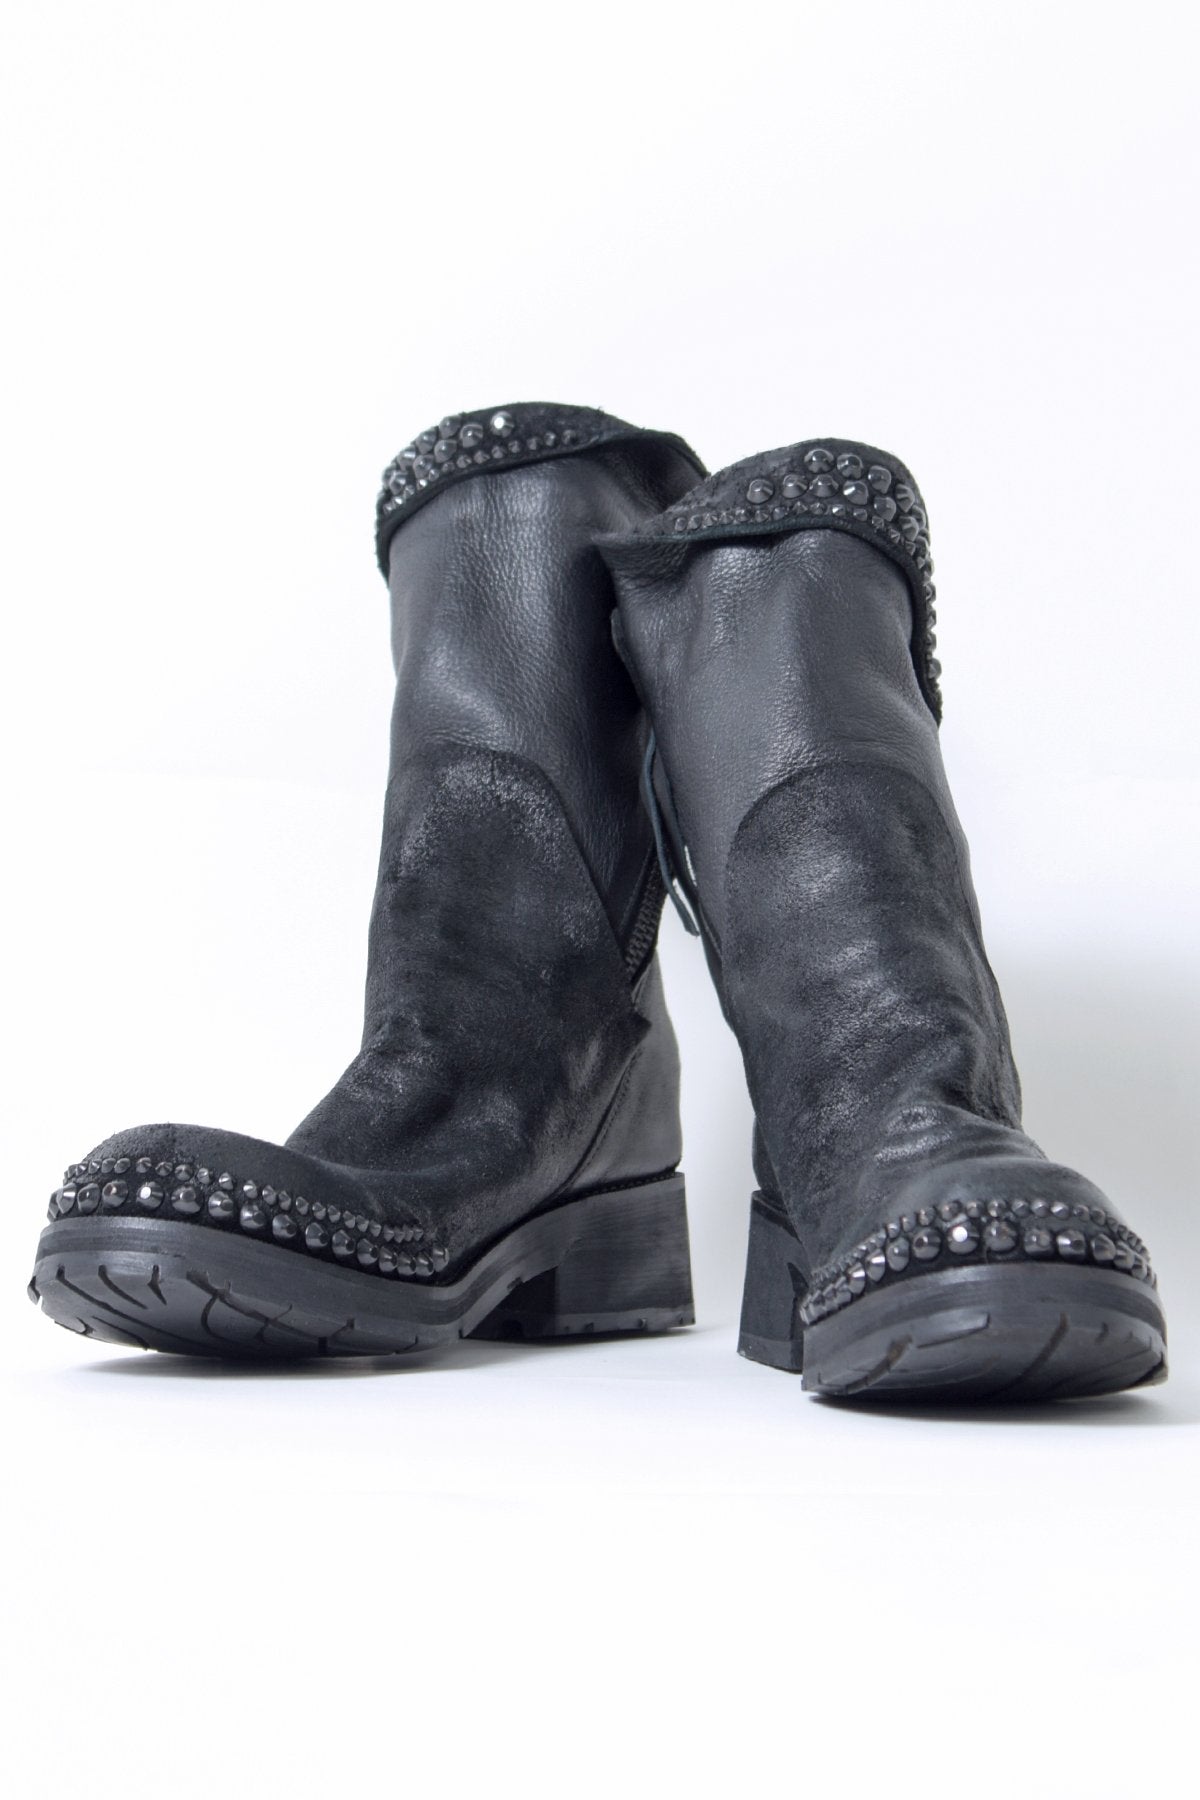 2102-BO03 Crush Jet Boots 06 / SPC | KMRii OFFICIAL ONLINE STORE